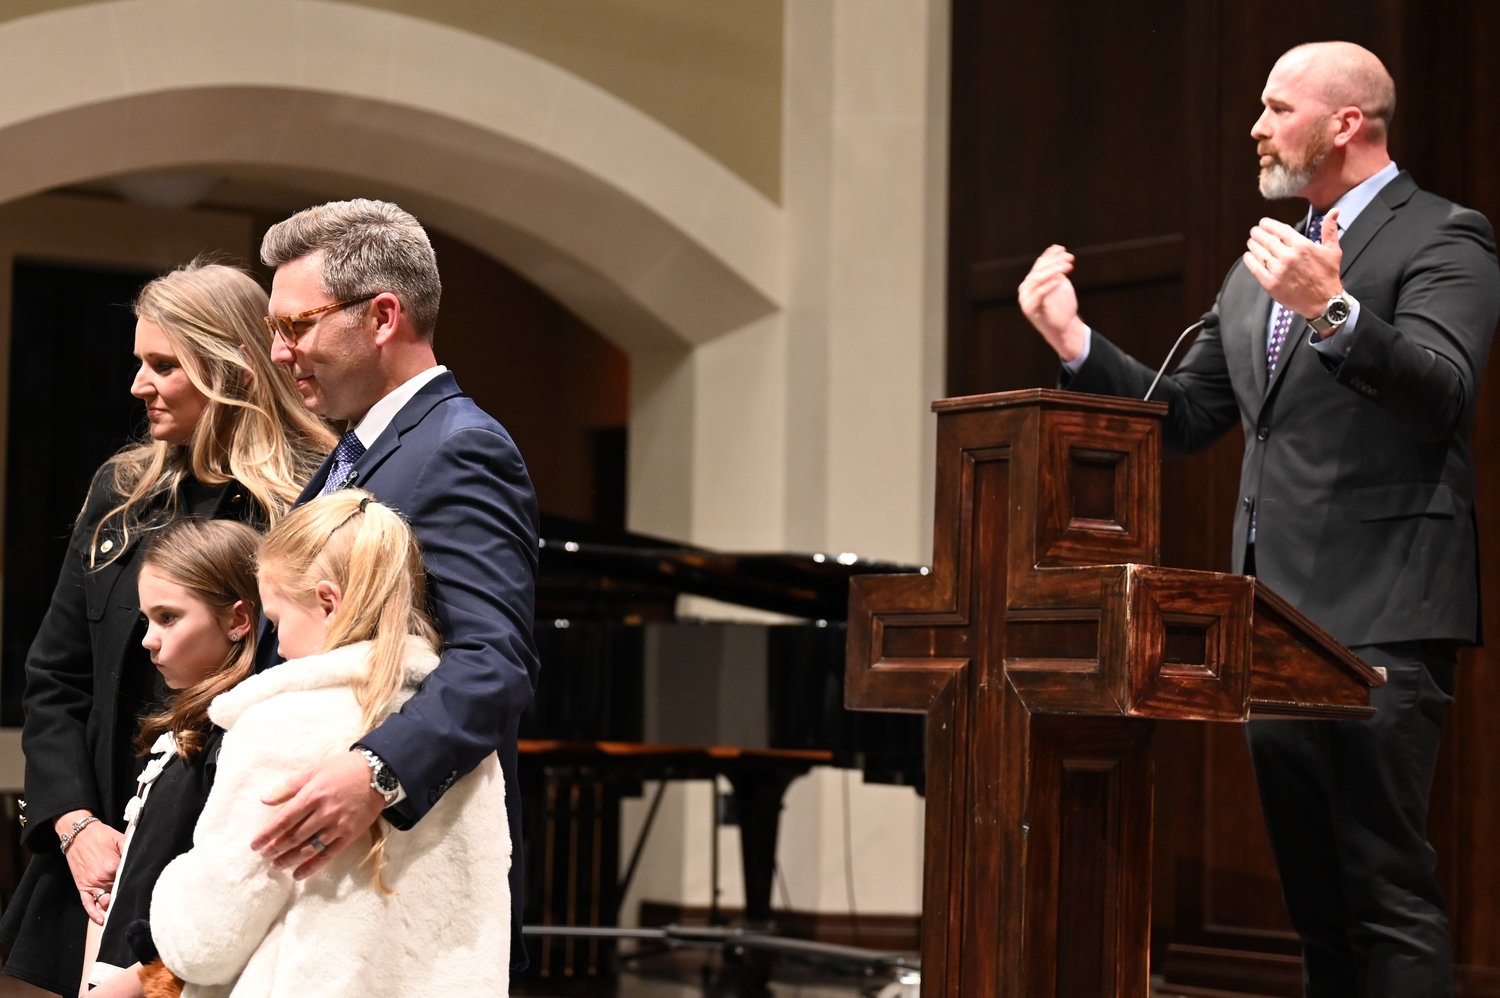 Brent Leatherwood stands with his wife and children at an installation service as his pastor, Aaron Bryant, calls for attendees to pray on Monday, March 20, 2023. (Index/Roger Alford)